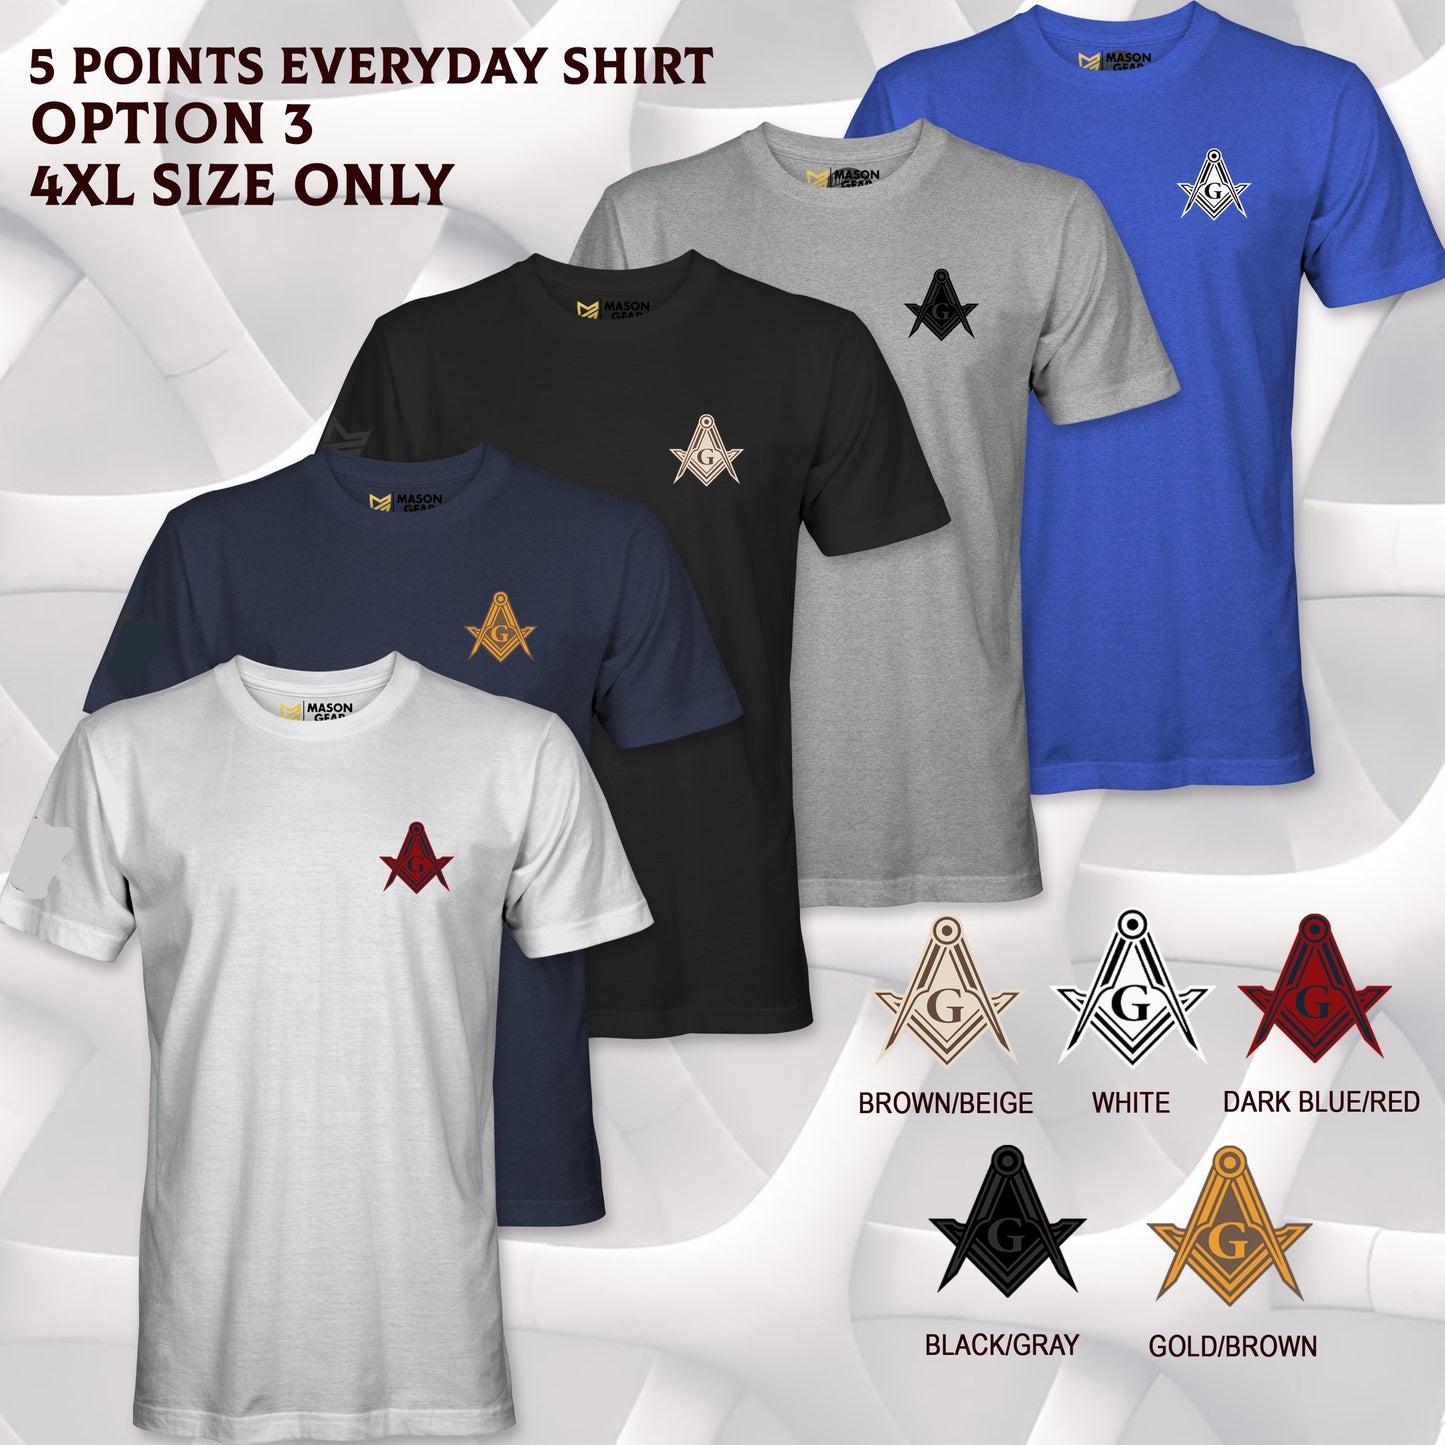 5 POINTS Everyday shirt